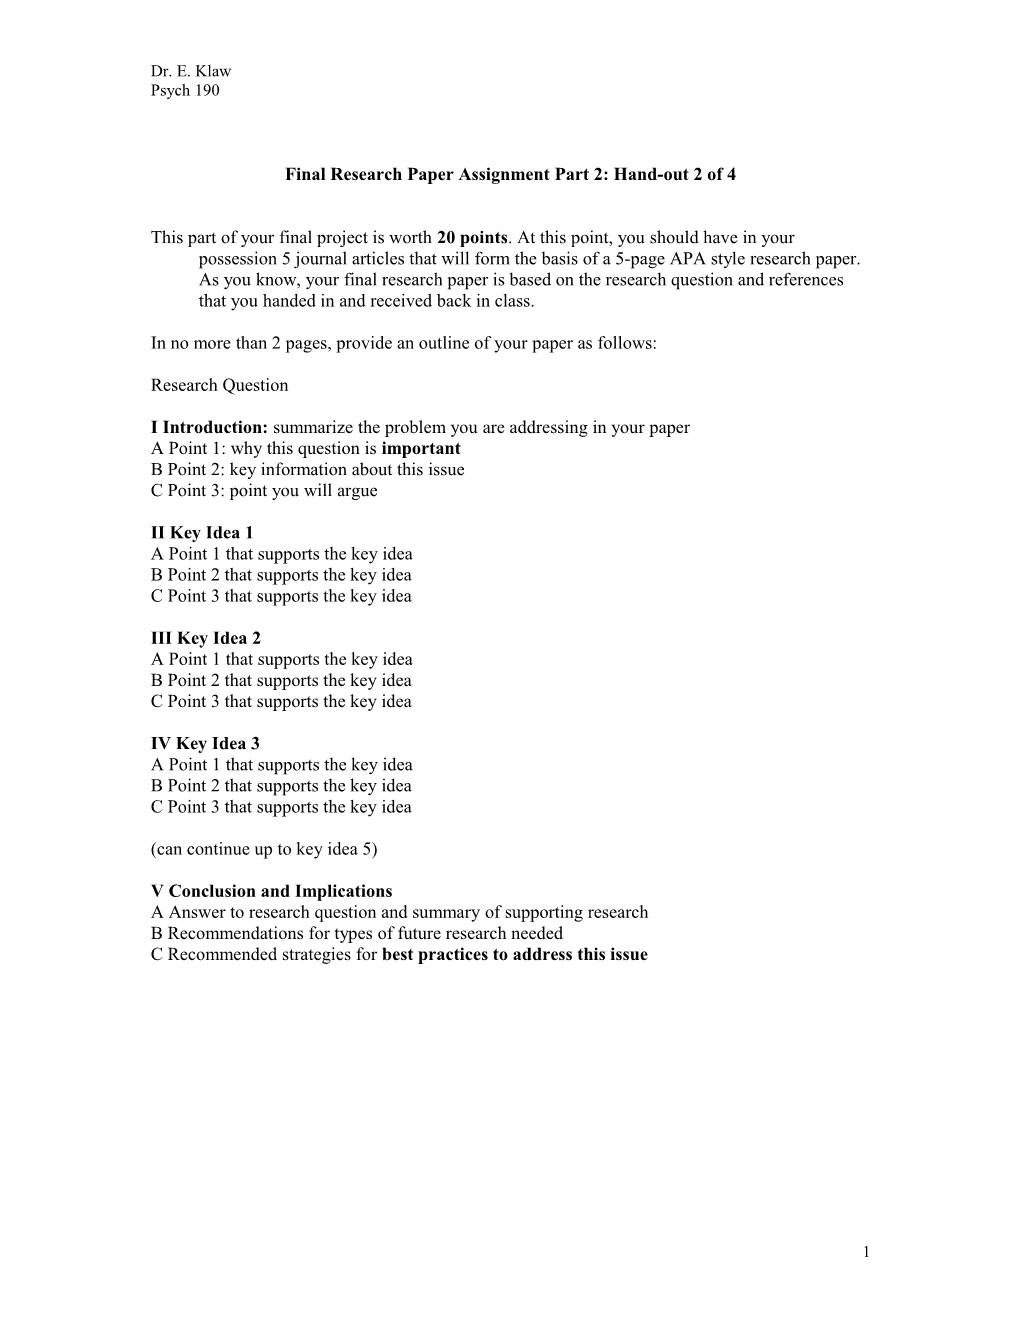 Final Research Paper Assignment Part 2: Hand-Out 2 of 5